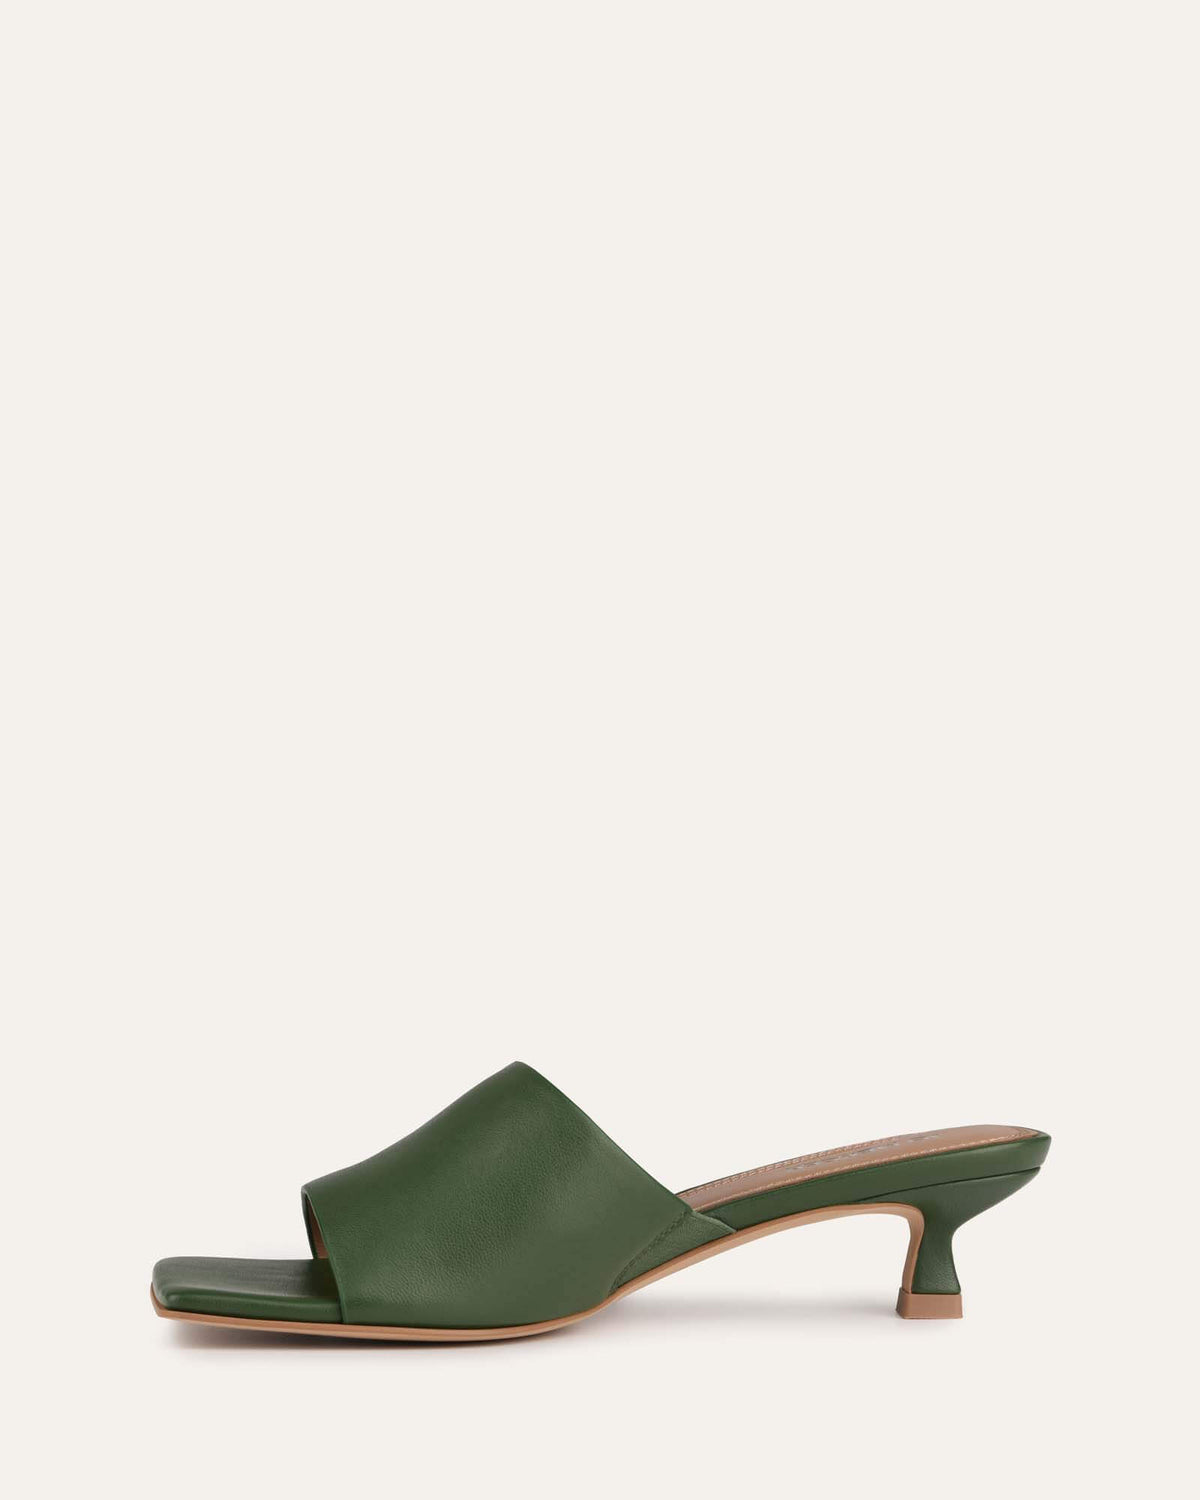 MAEVE MID HEEL SANDALS MOSS GREEN LEATHER